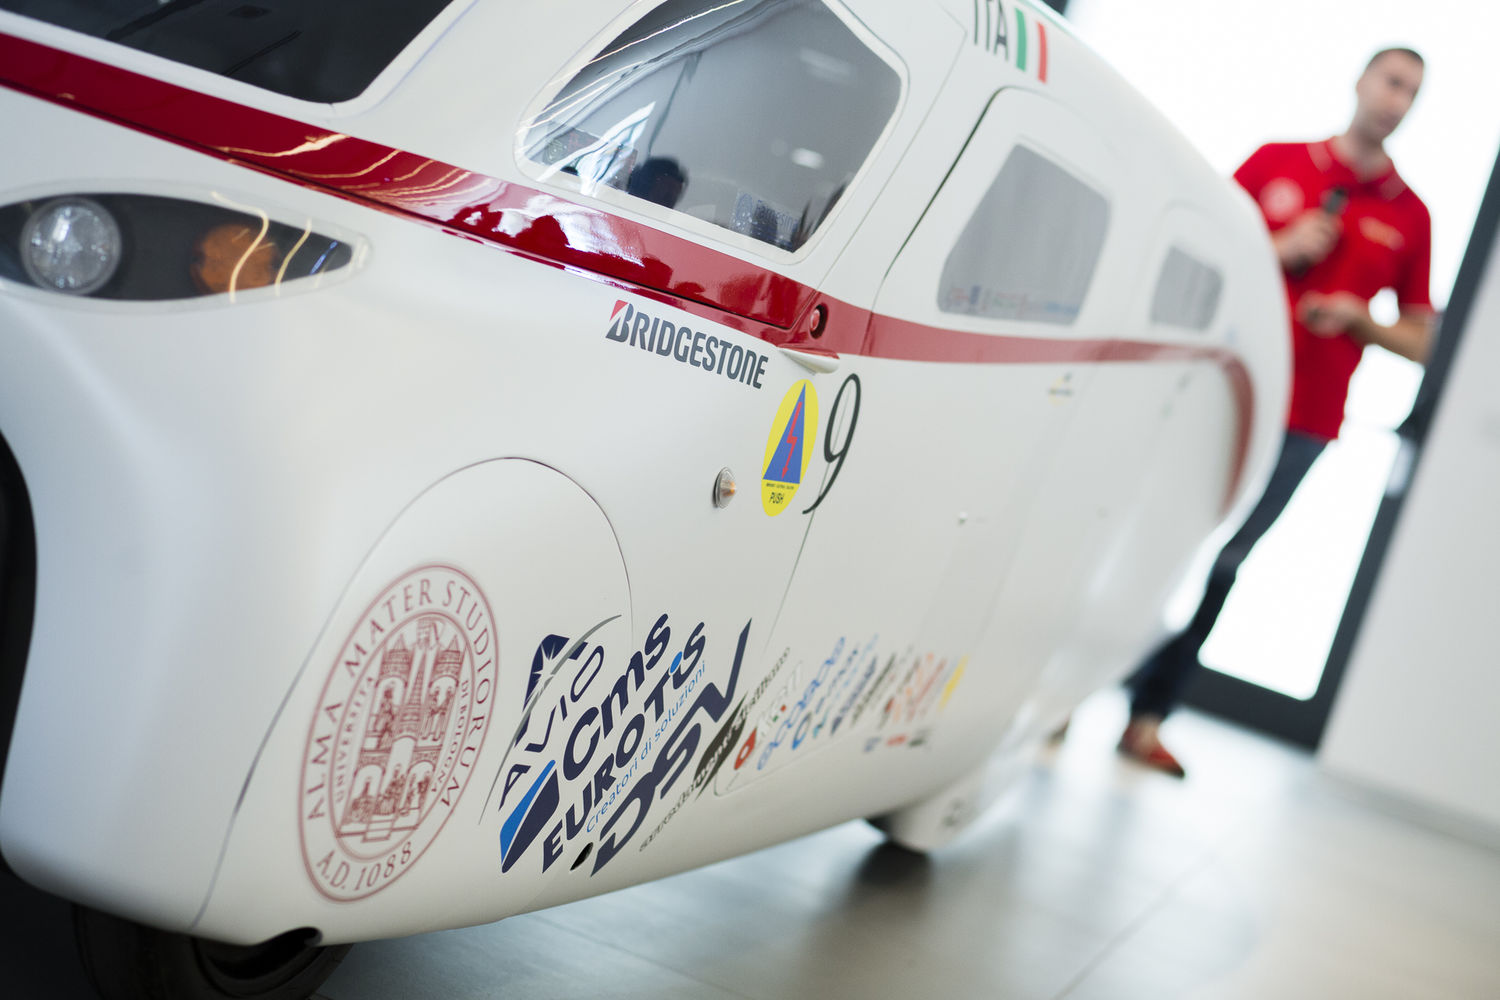 World Solar Challenge: the new Australian challenge for the Emilia 4 LT solar powered car is about to begin 